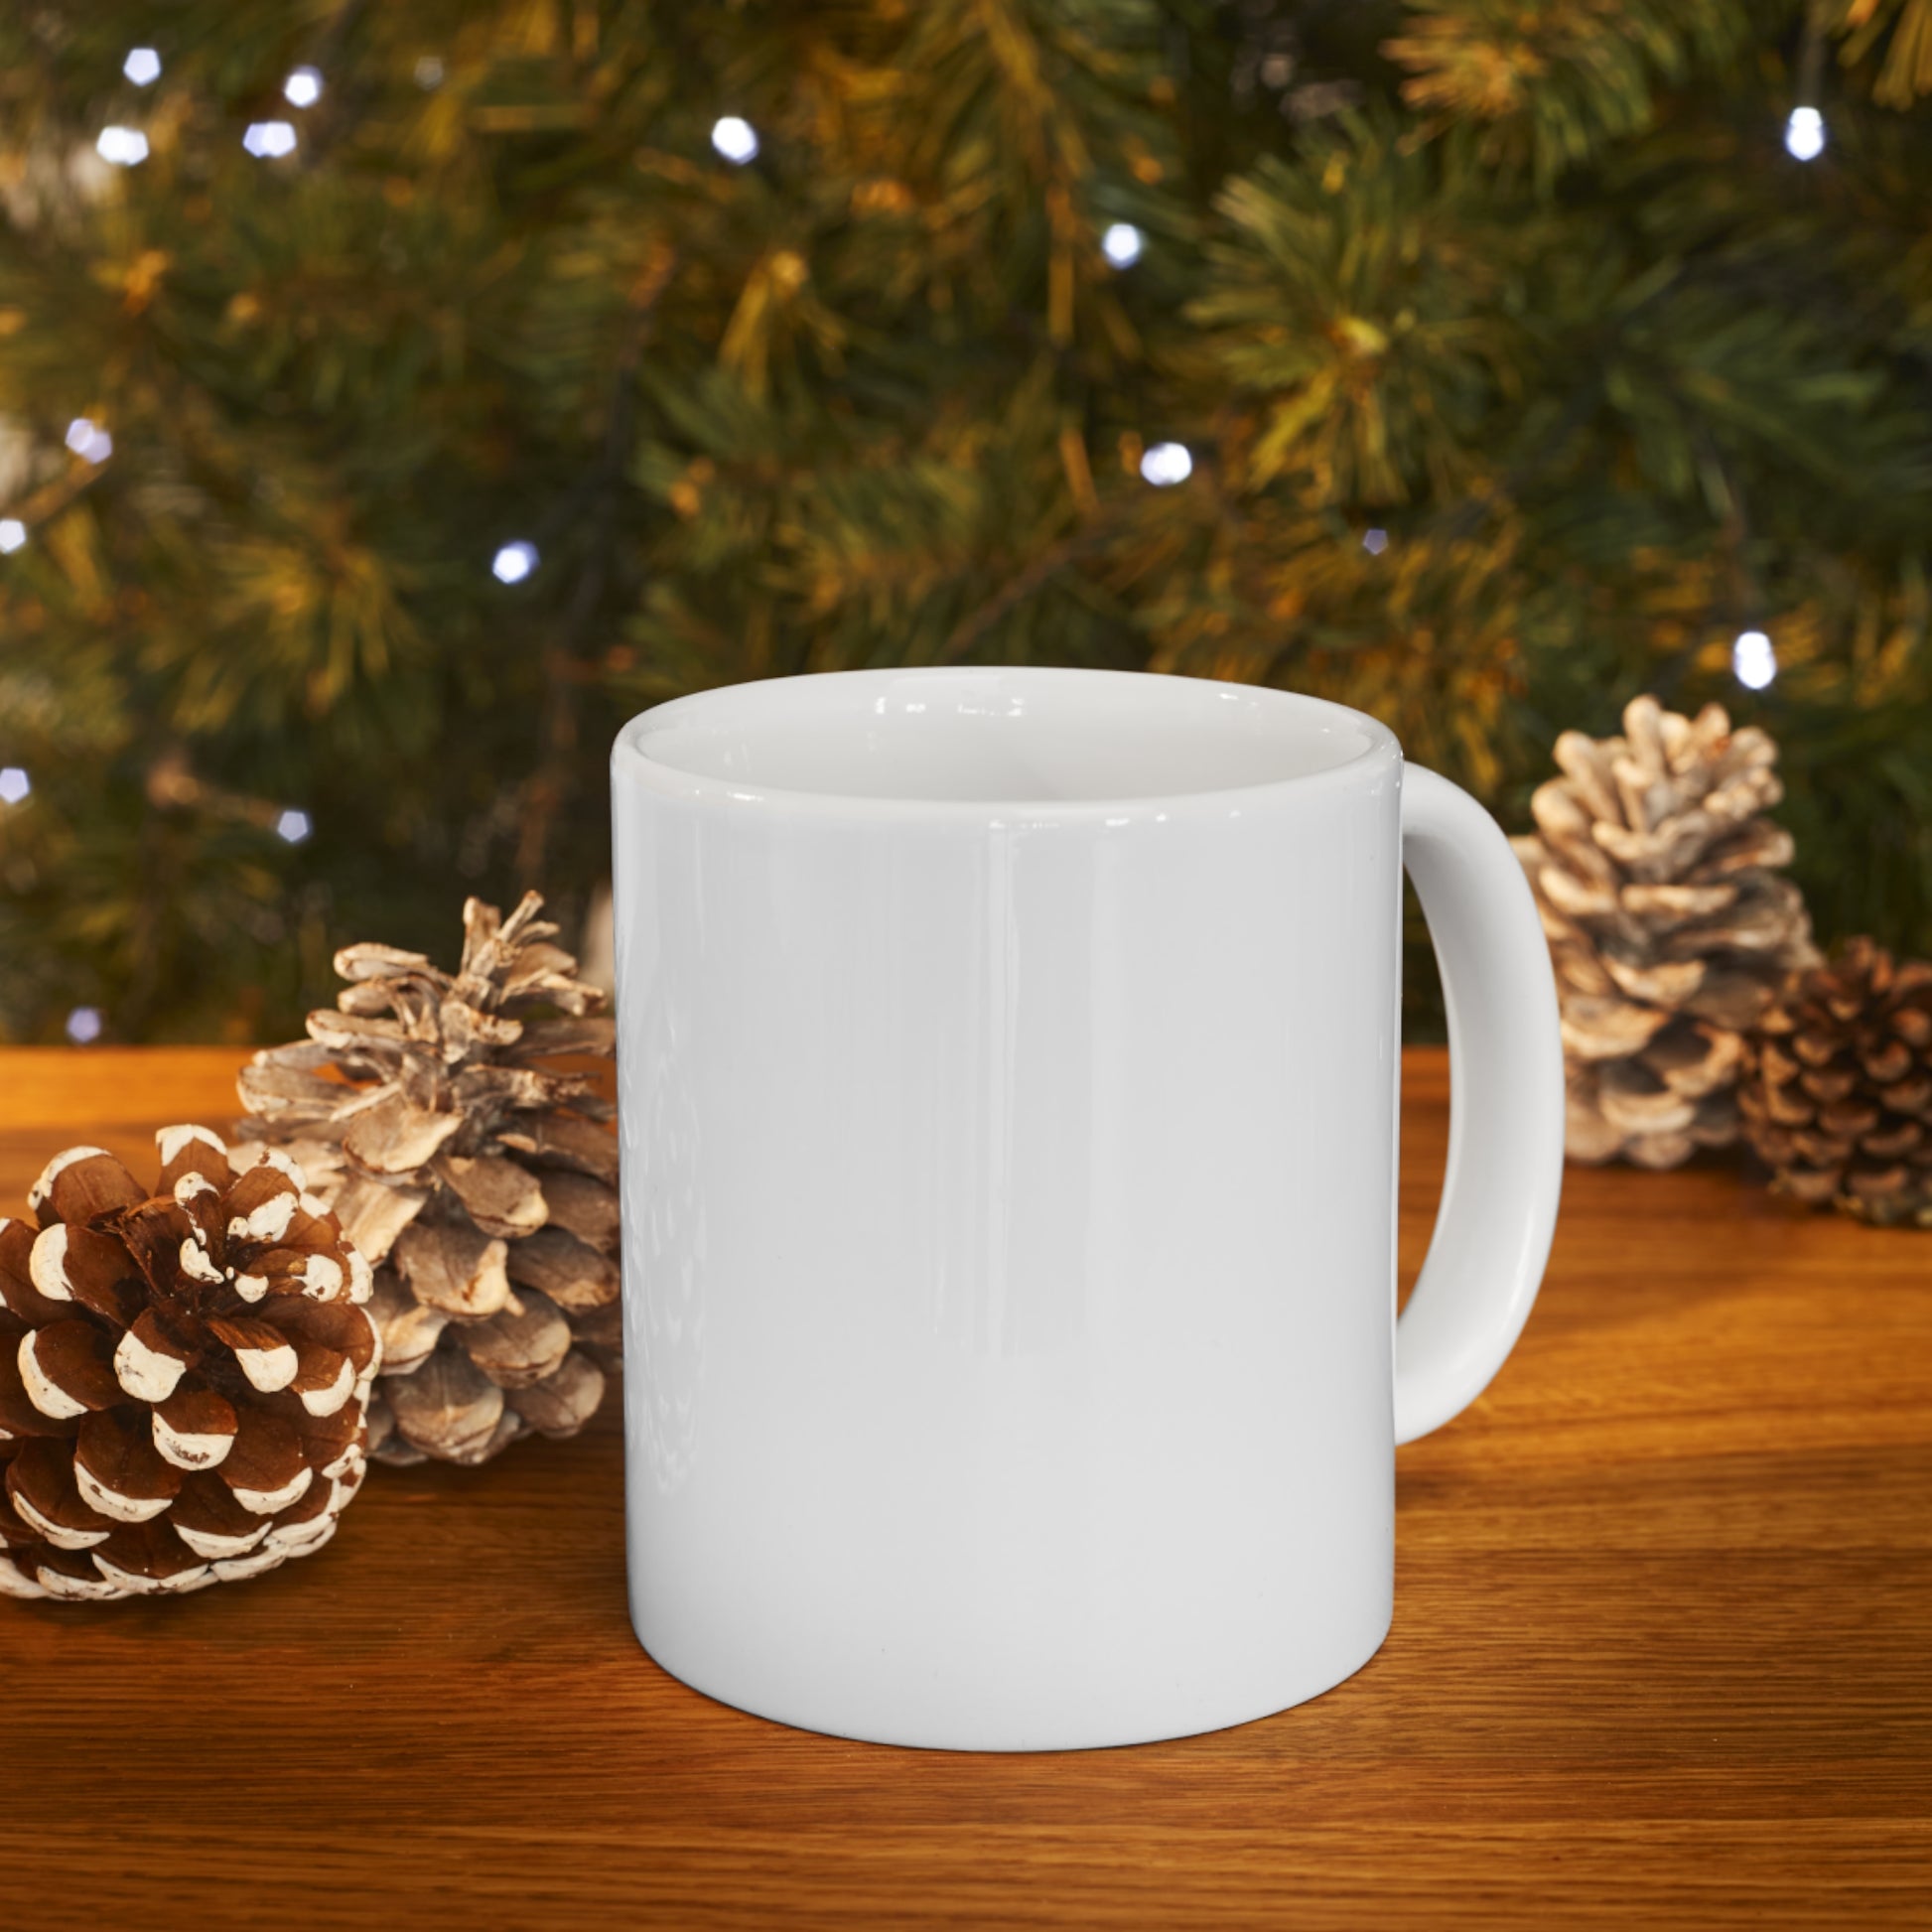 "I Love Maltipoos" Coffee Mug - Weave Got Gifts - Unique Gifts You Won’t Find Anywhere Else!